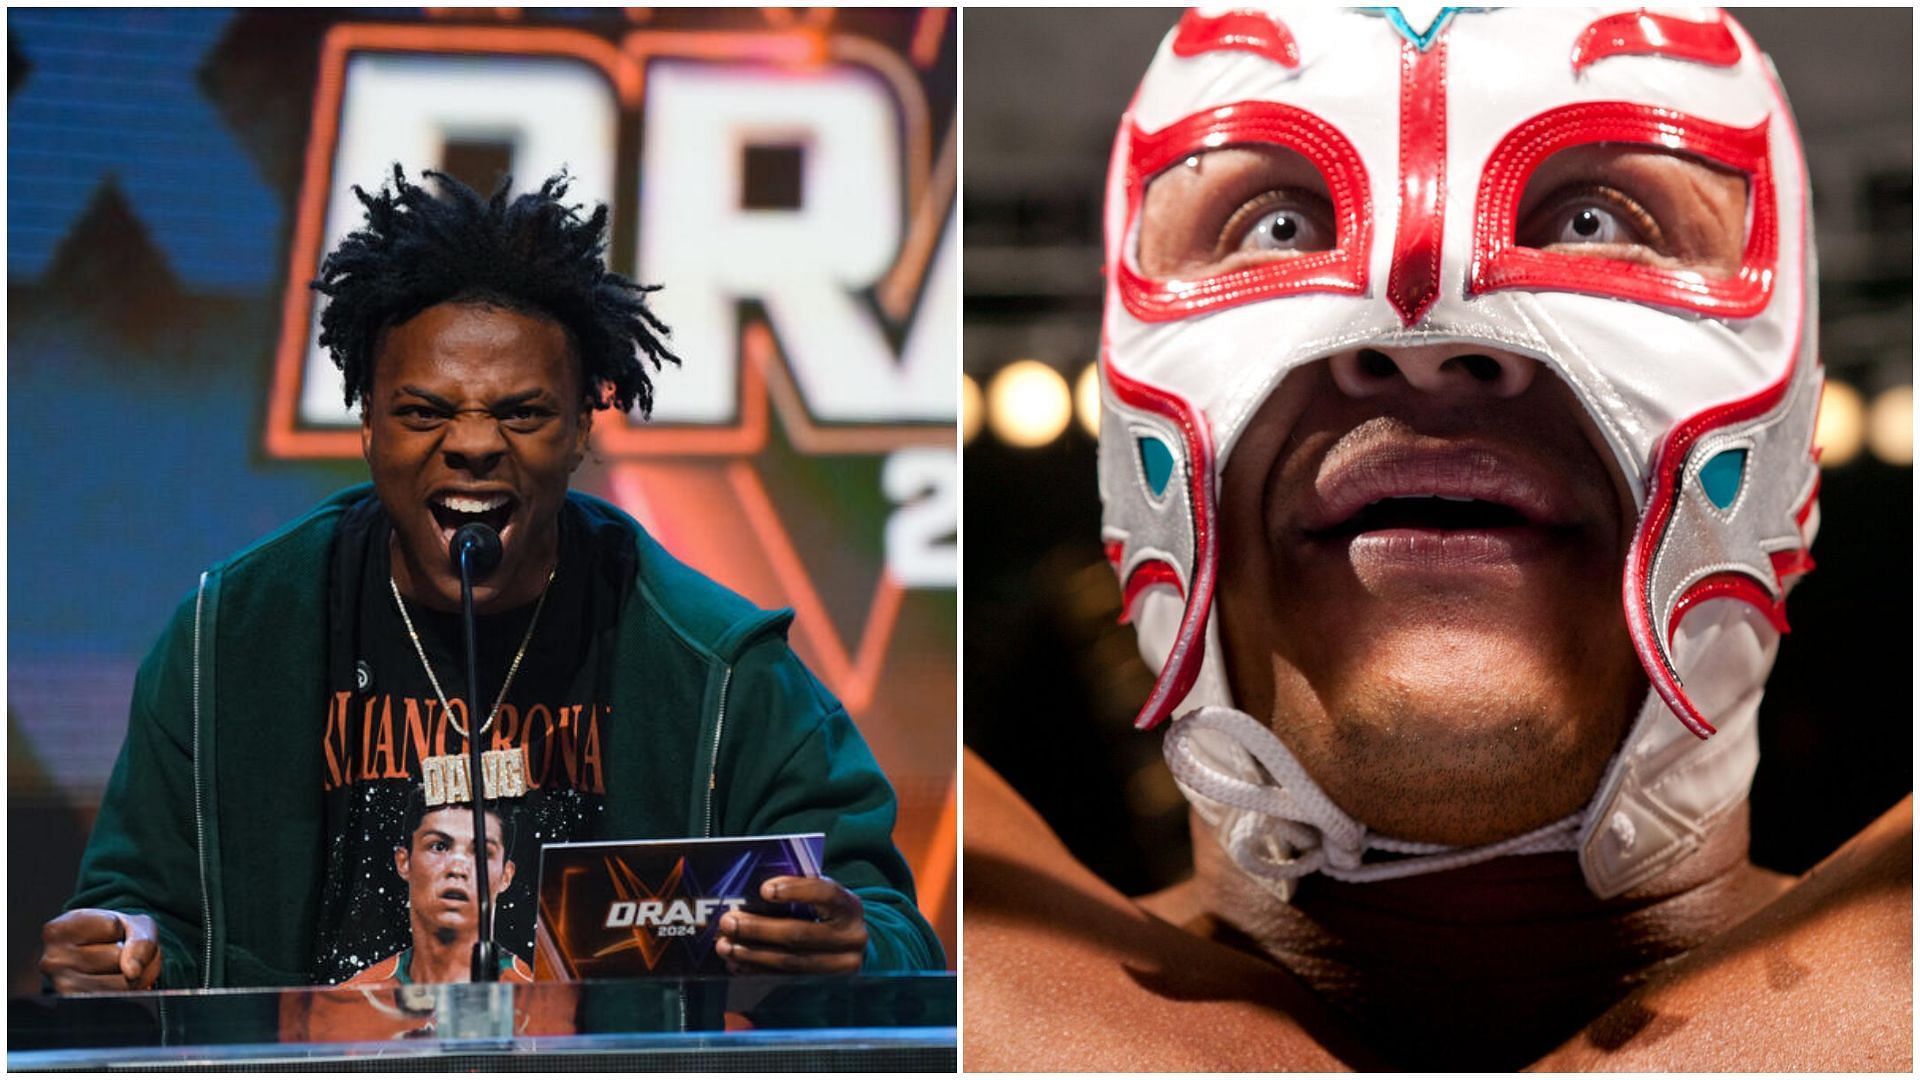 IShowSpeed (left), and Rey Mysterio (right).